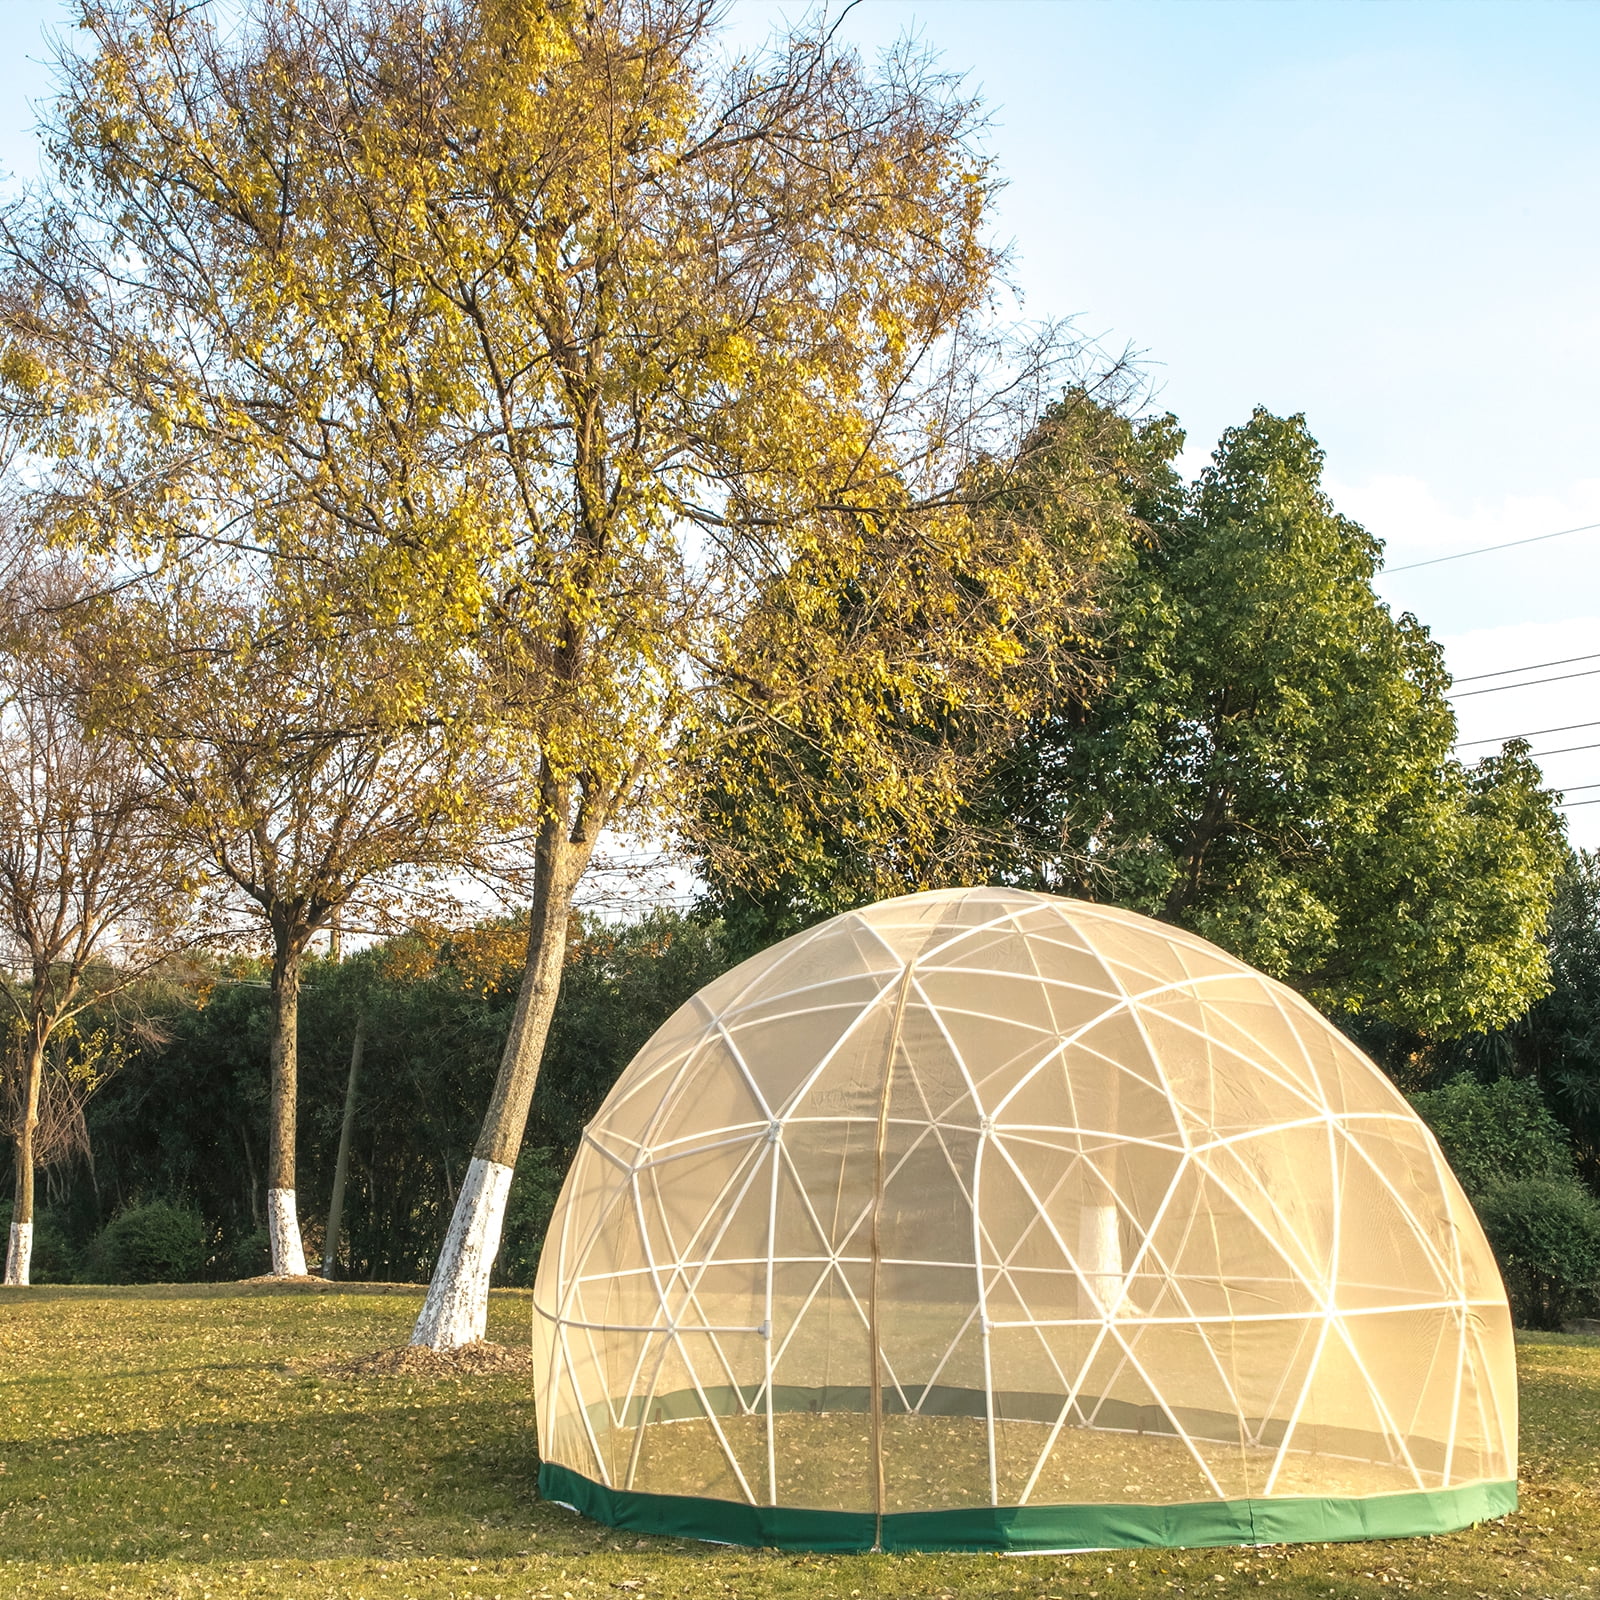 Outdoor Winter Geodesic Dome with PVC Cover Patiolife Garden Dome 9.5ft Party Bubble Tent with Door and Windows for Sunbubble Backyard